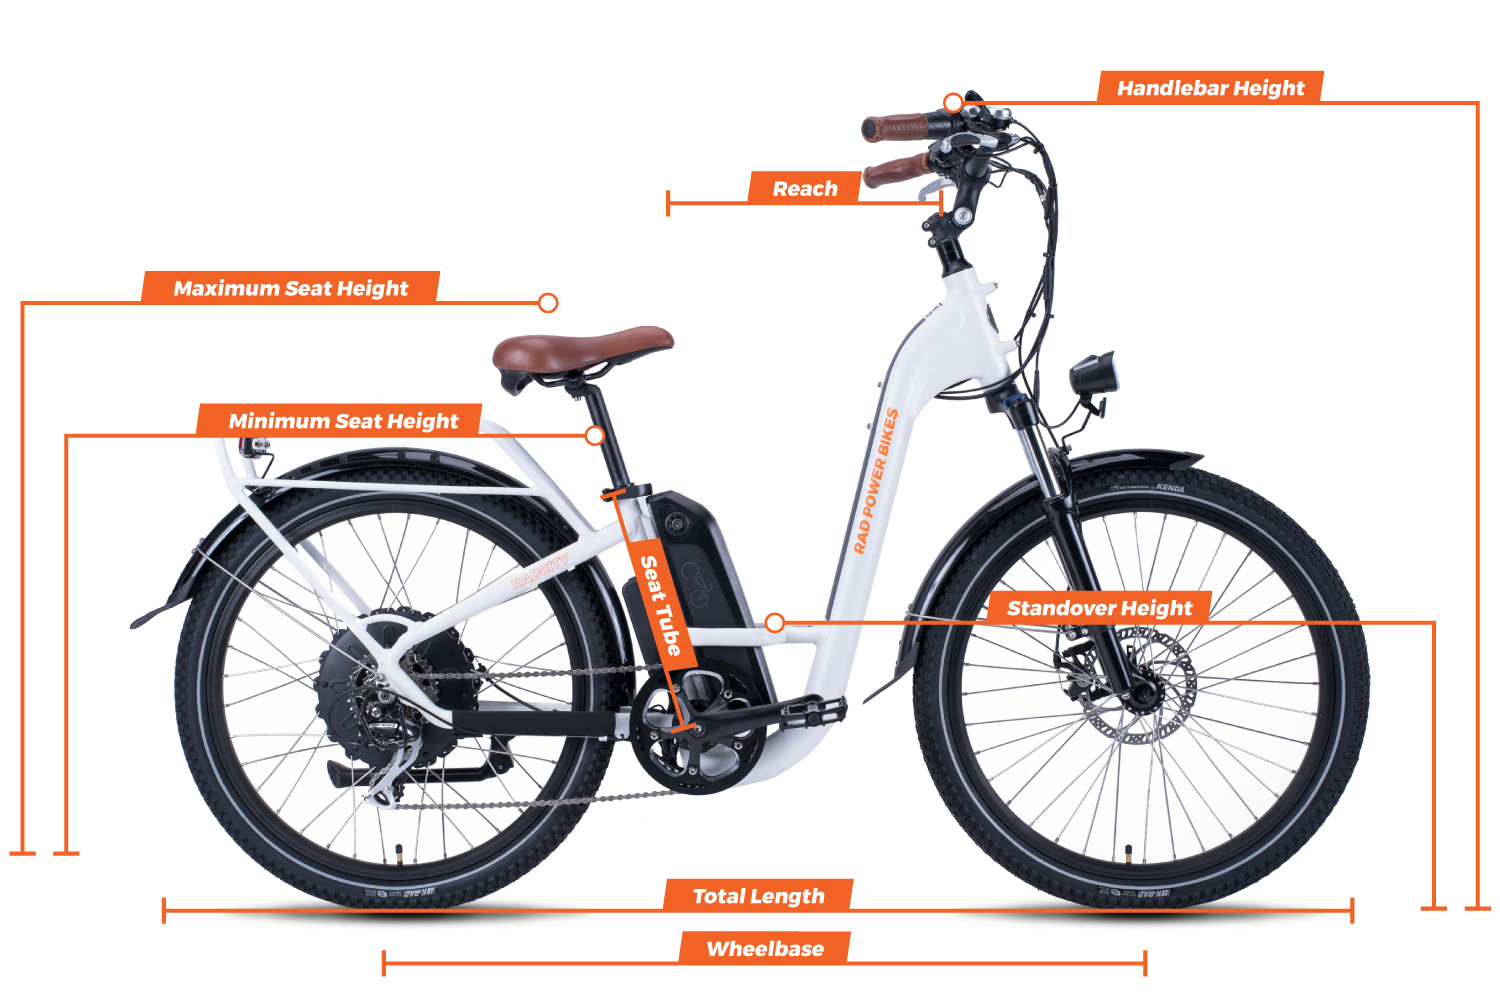 Geometry chart for the RadCity Step-Thru Electric Commuter Bike Version 3